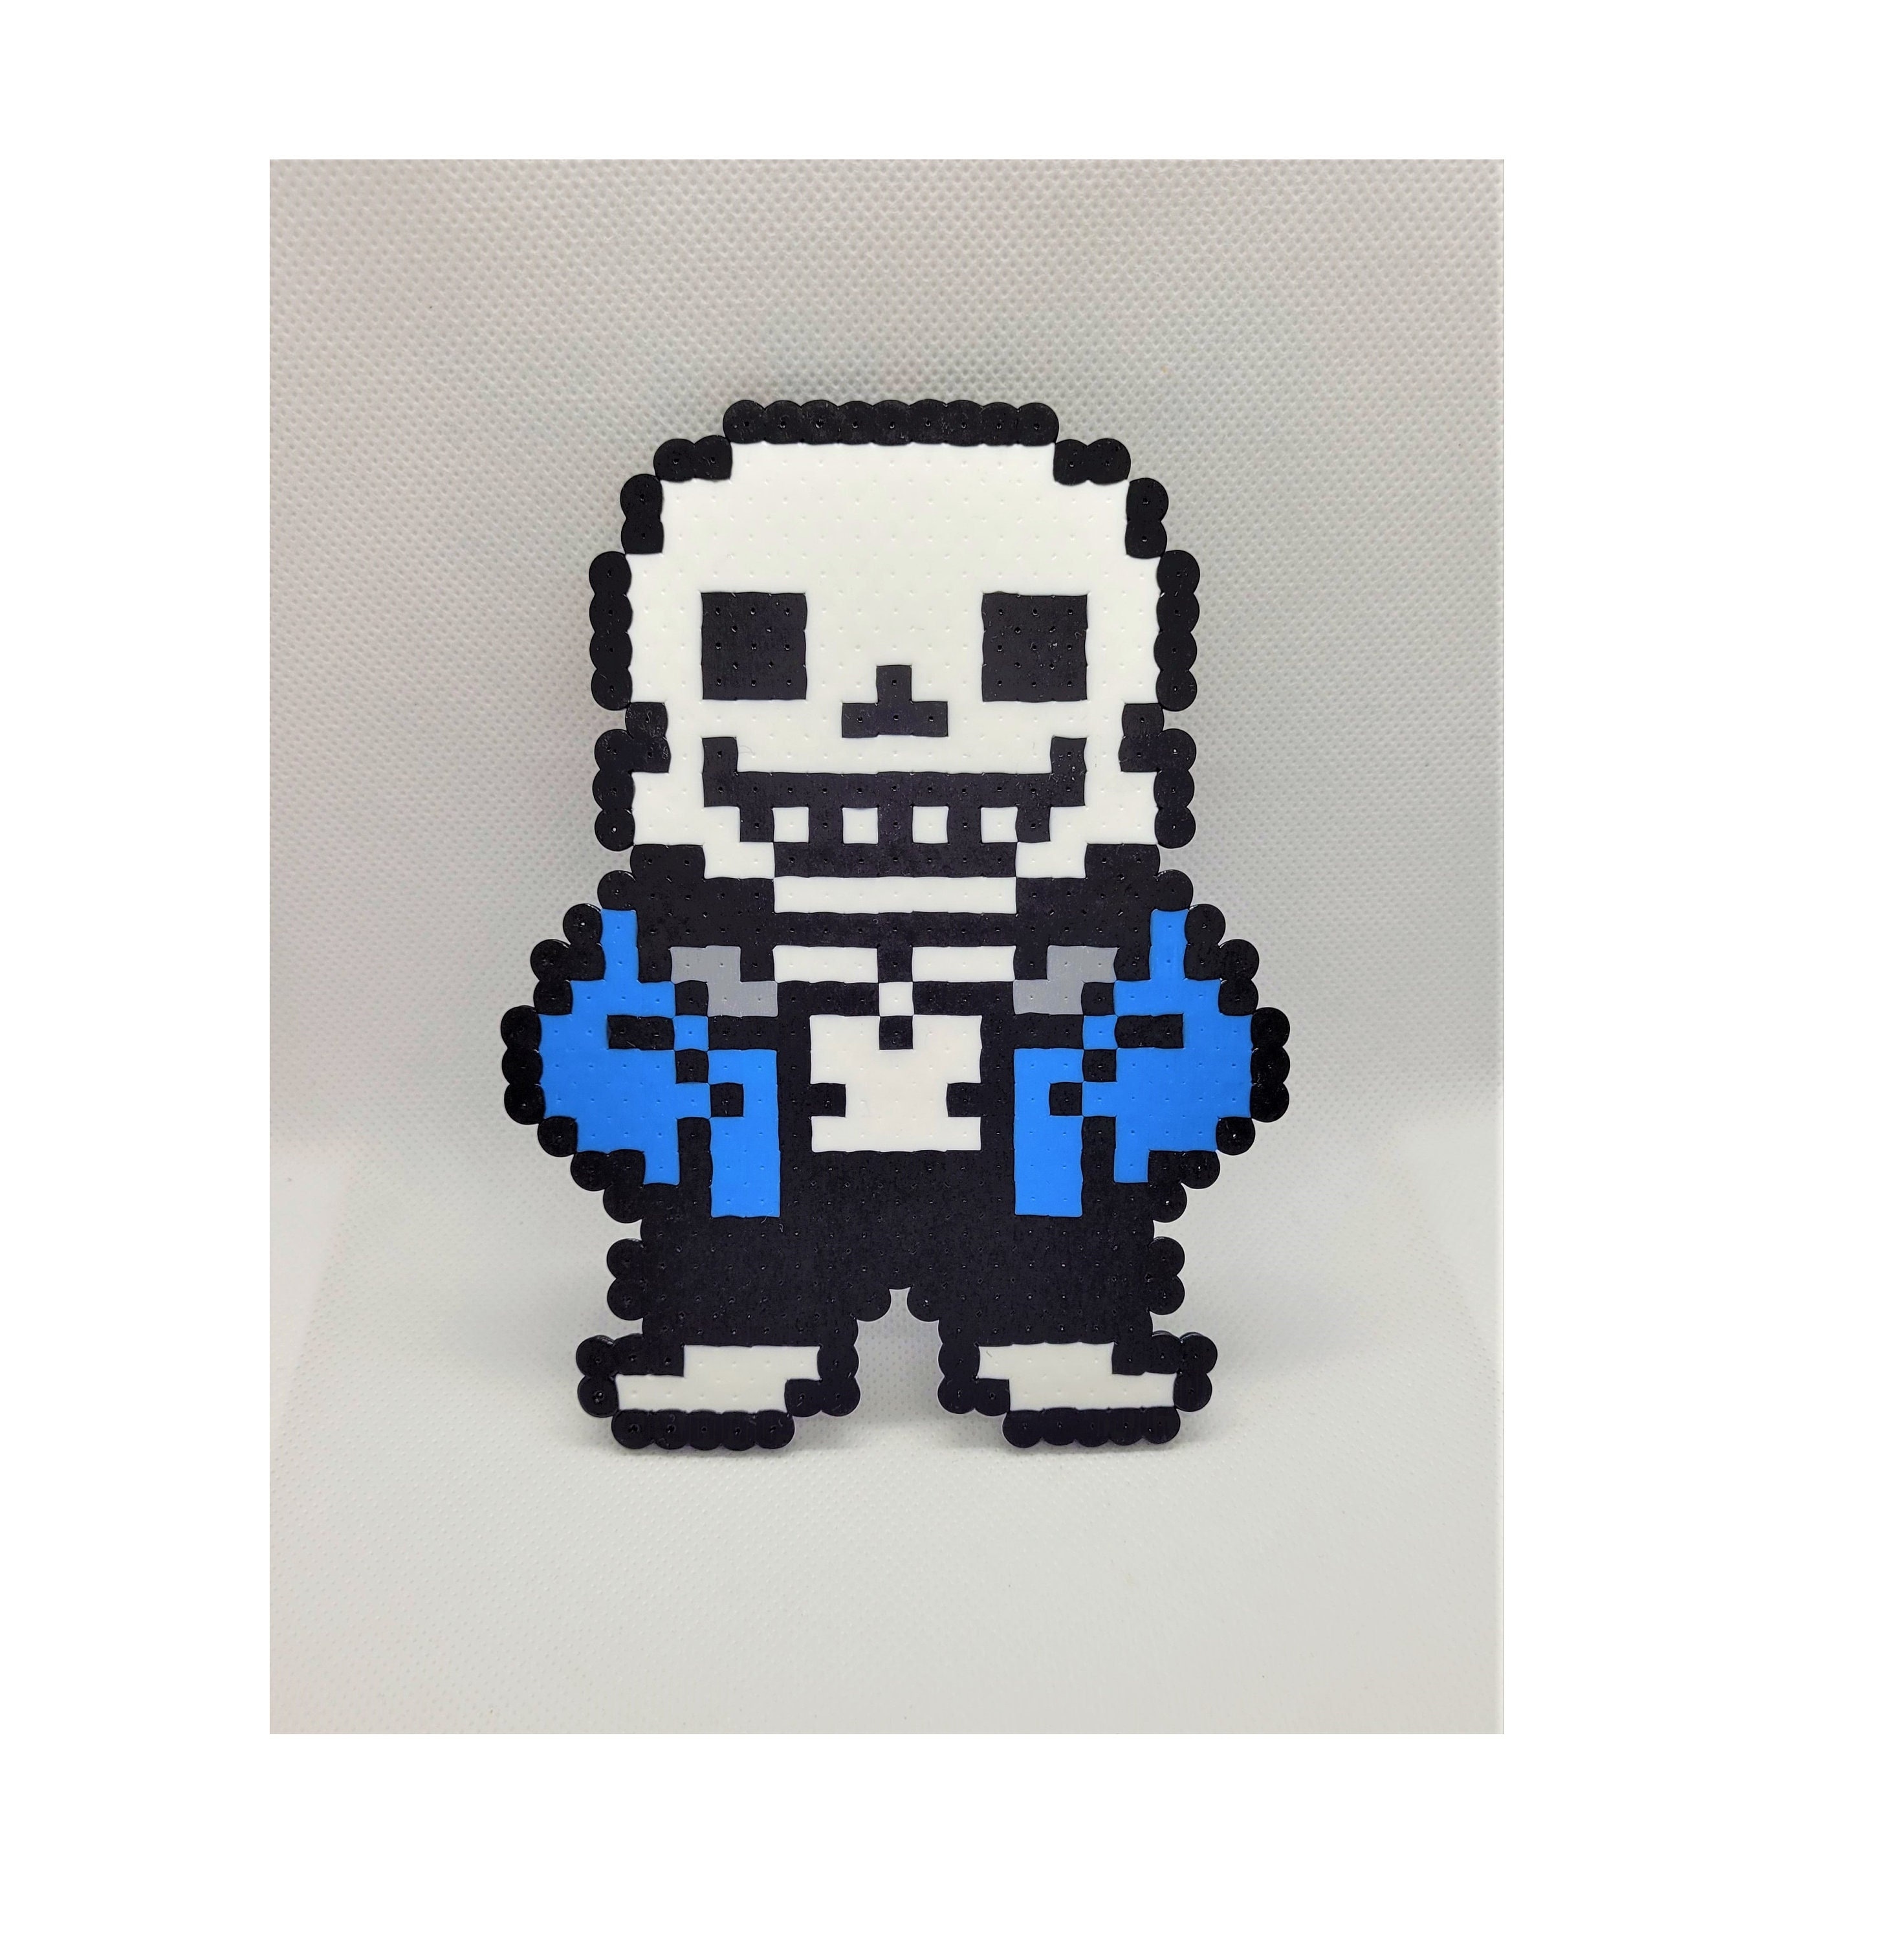 Sans goes 0 to 100 real quick : r/Undertale